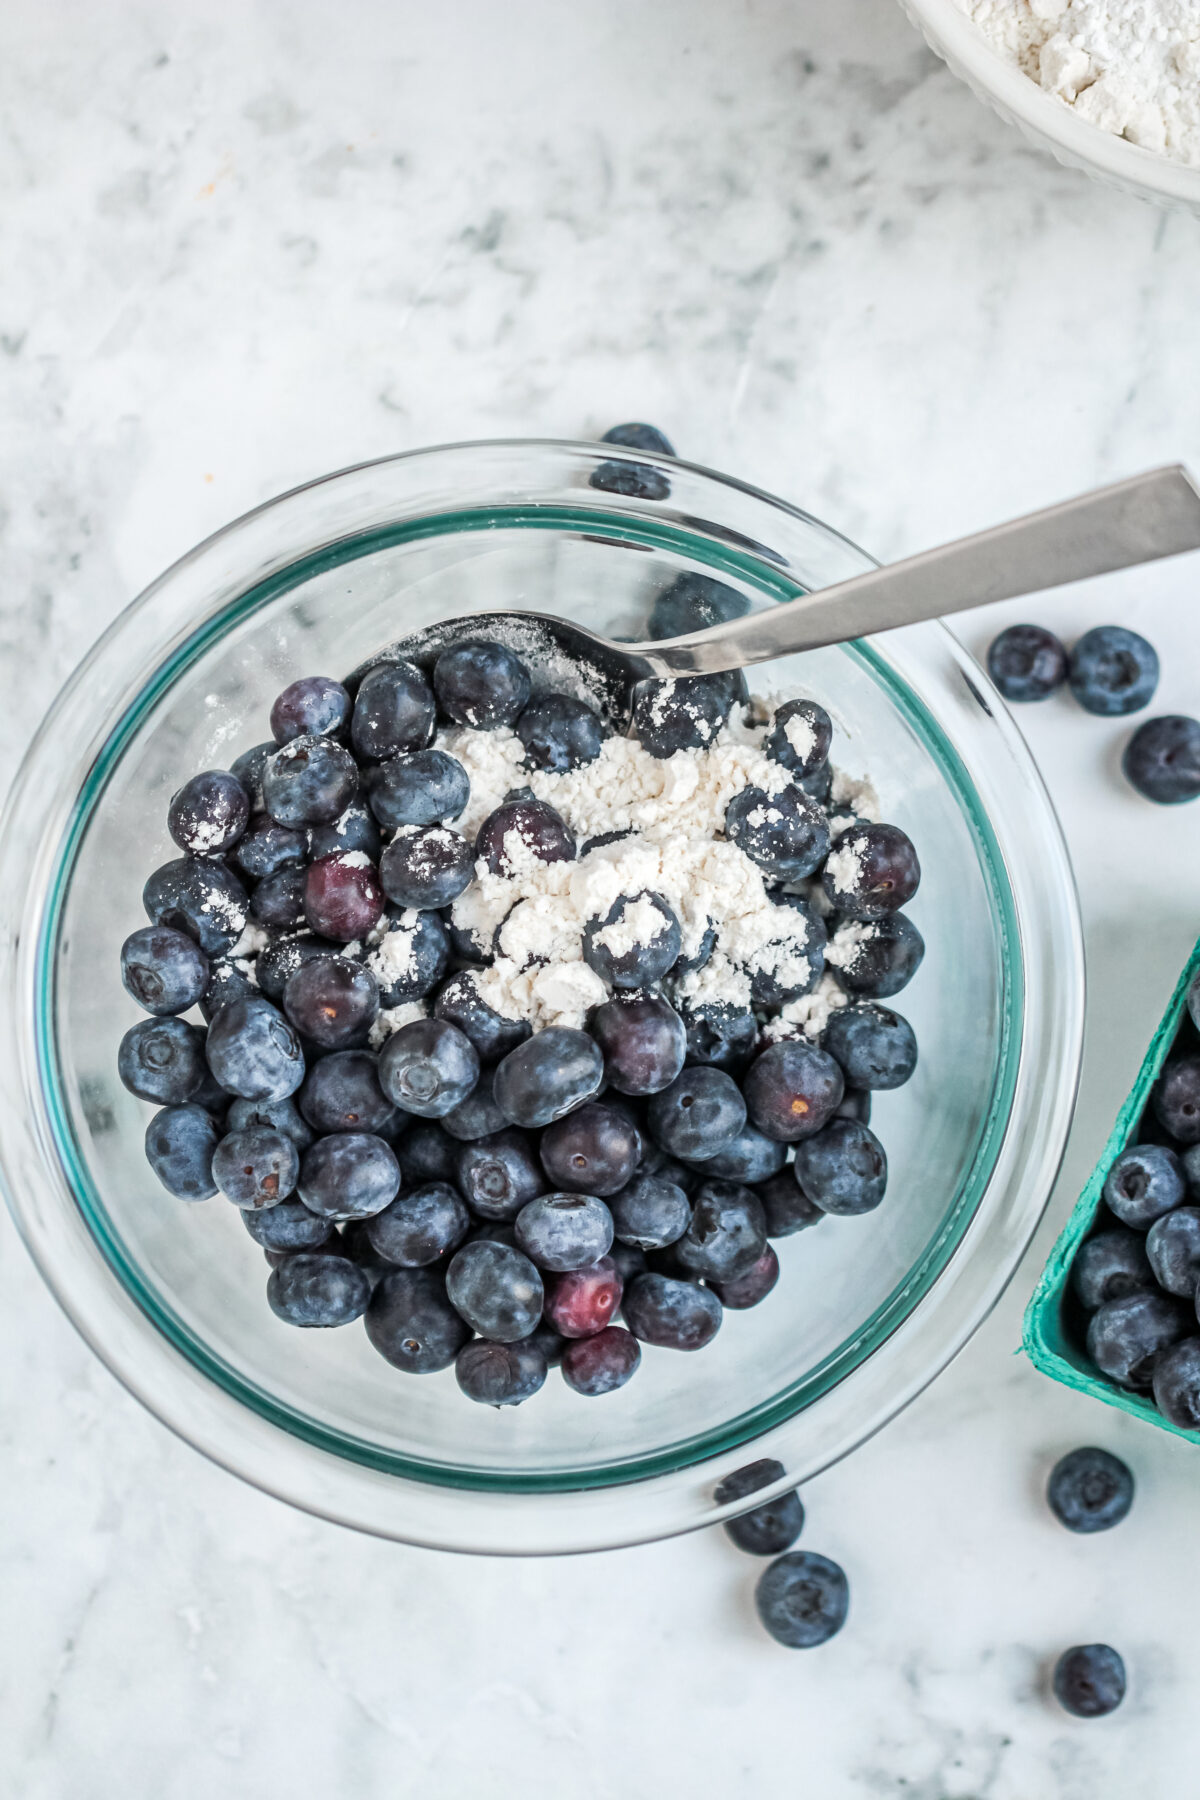 tossing blueberries with flour in a glass bowl.